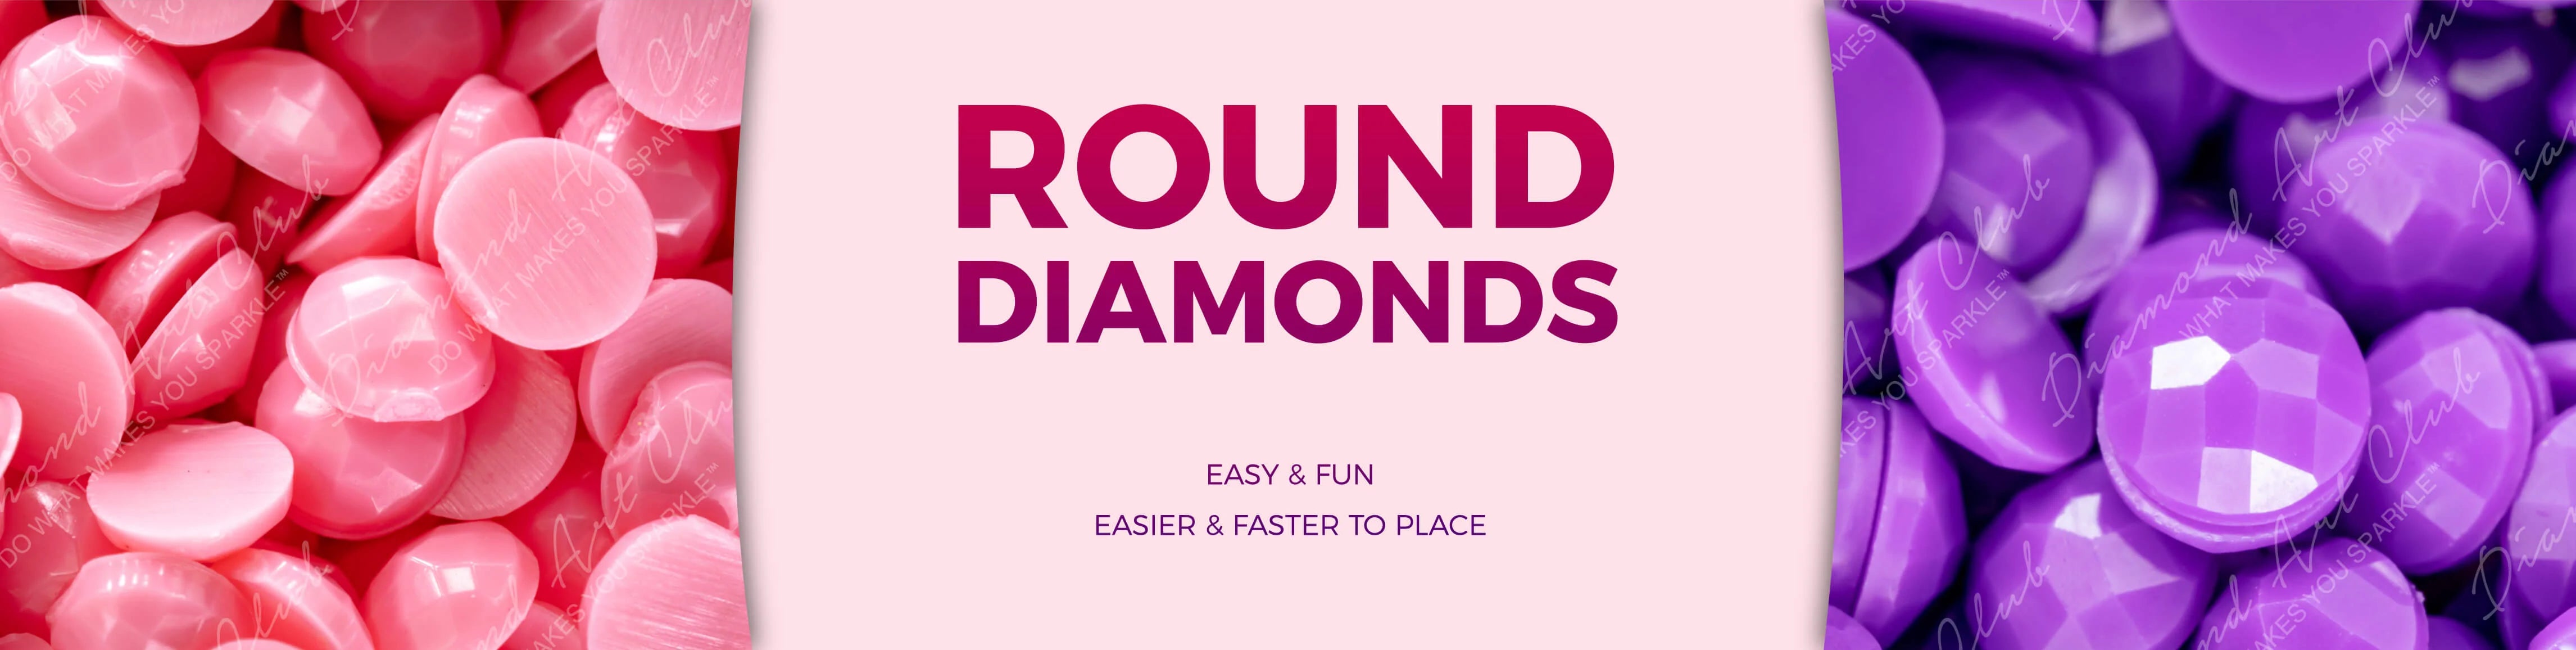 How To Choose Between Round And Square Drill – Diamond Art Club